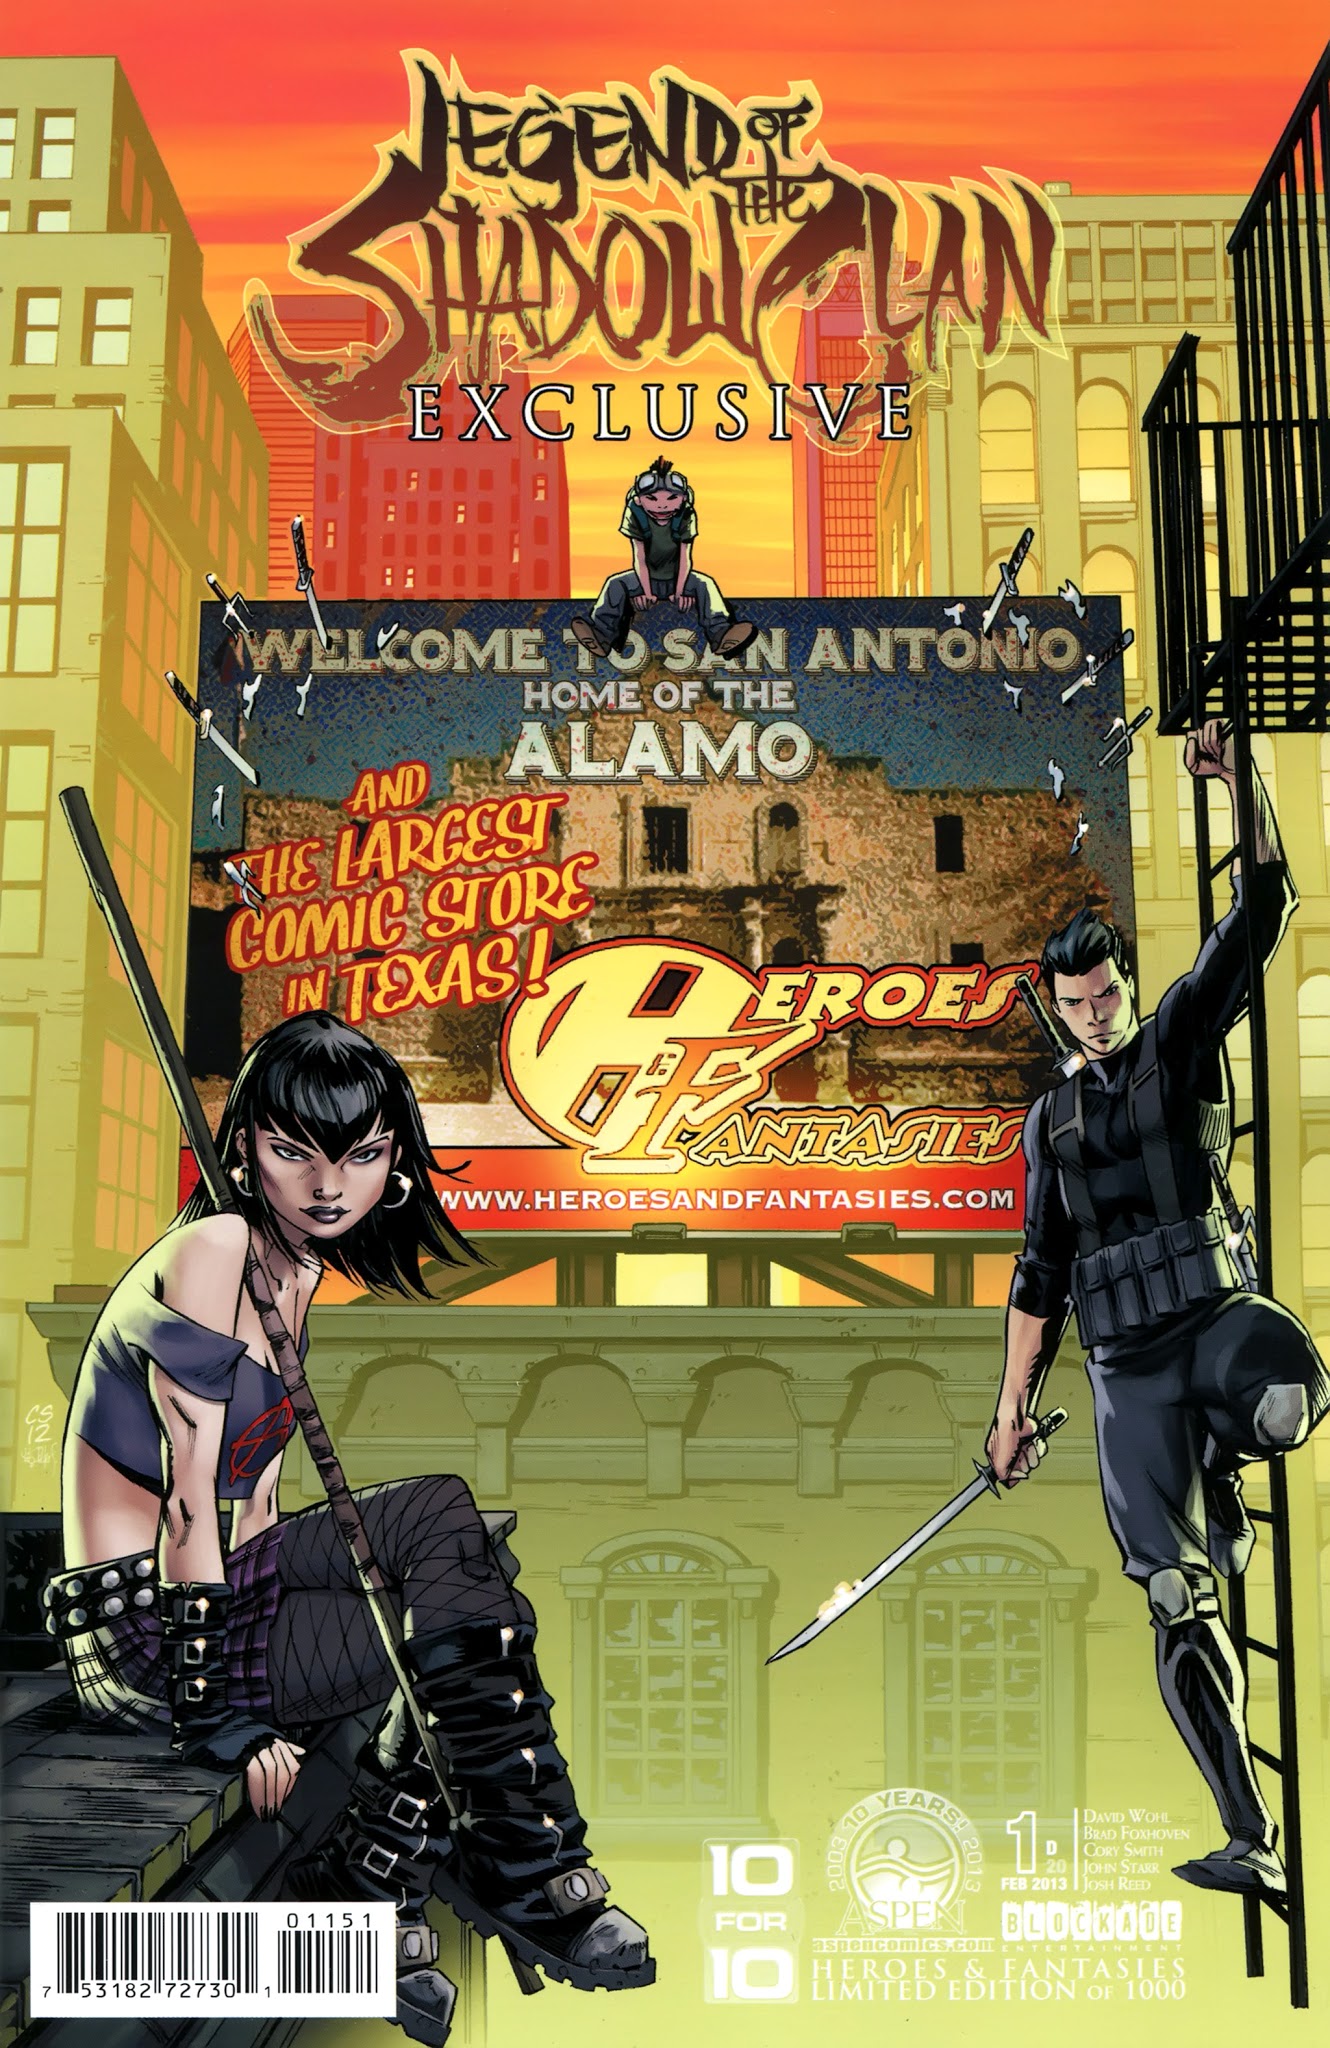 Read online Legend of the Shadow Clan comic -  Issue #1 - 4